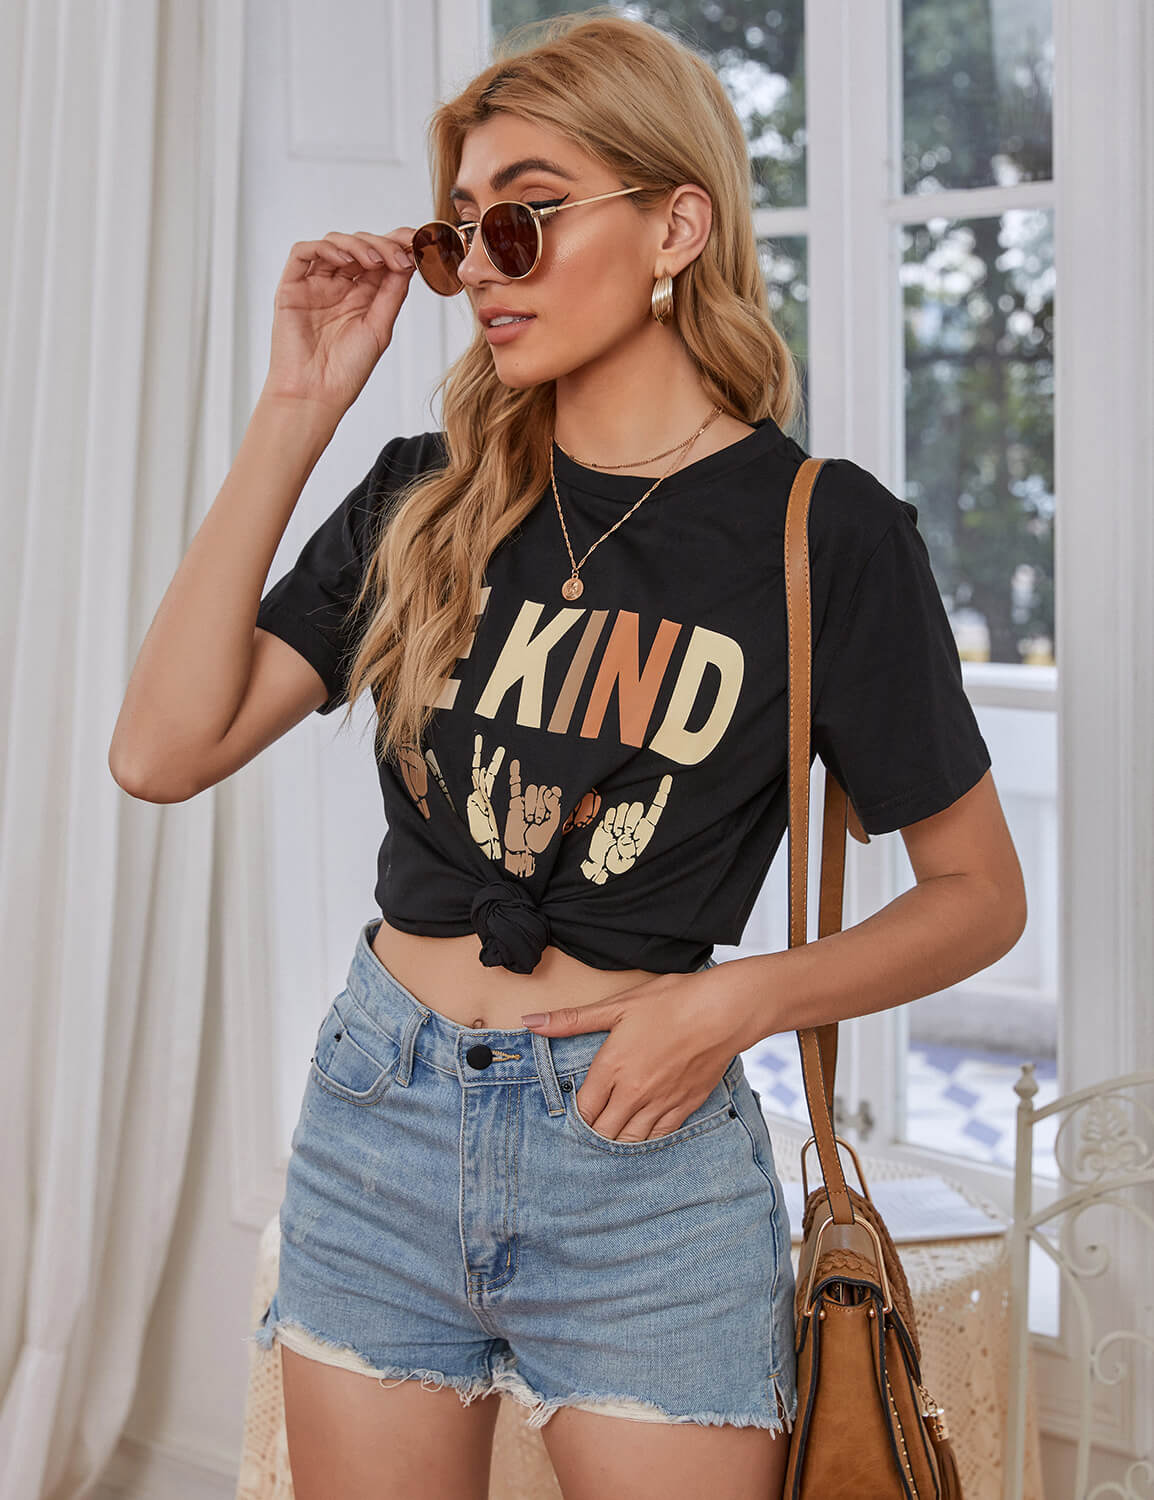 Be Kind Shirt with Hands Graphic Tee